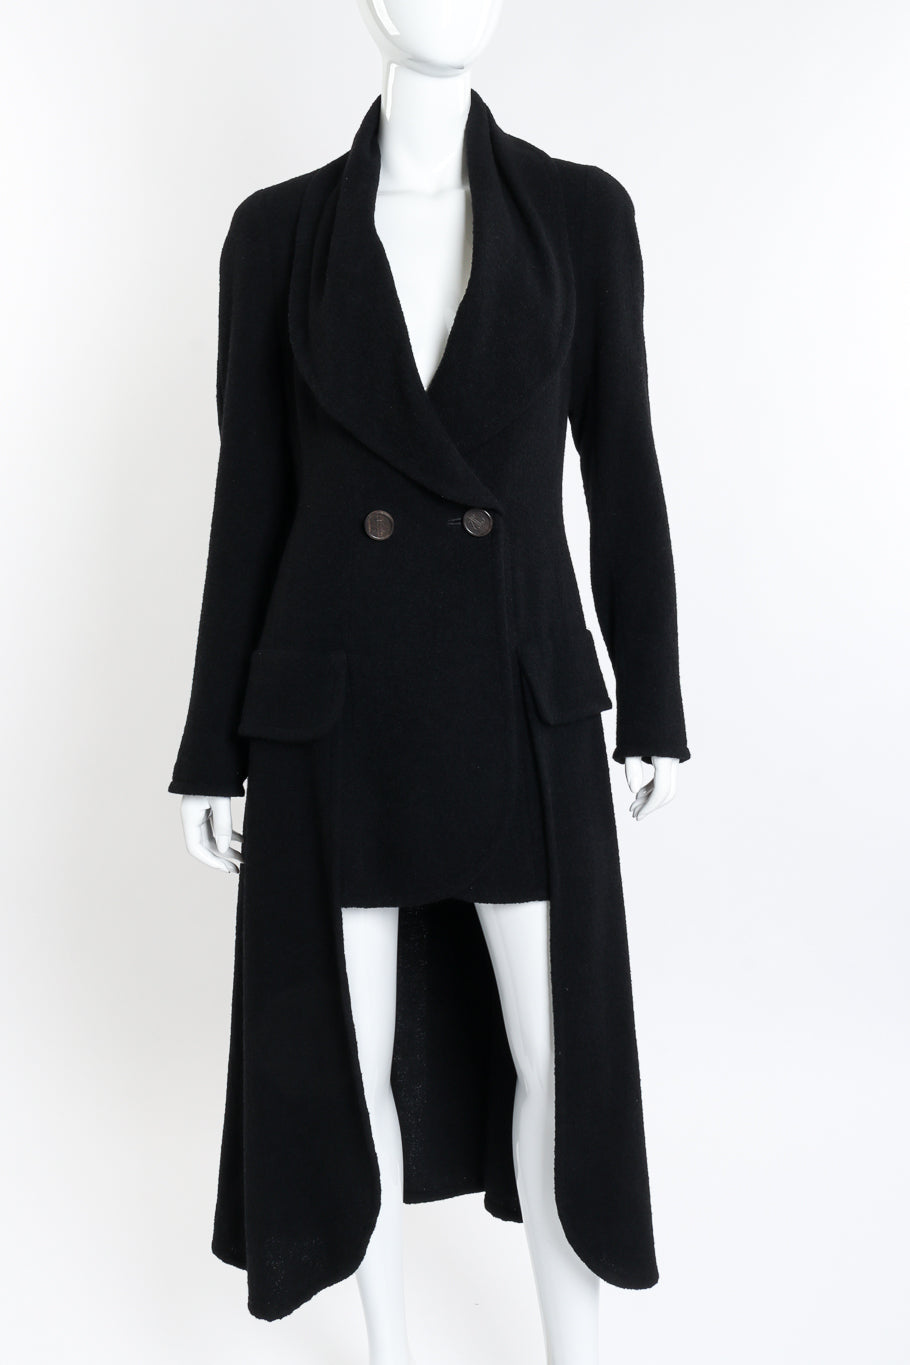 Tiered Bouclé Wool Coat by Karl Lagerfeld on mannequin front close @recessla